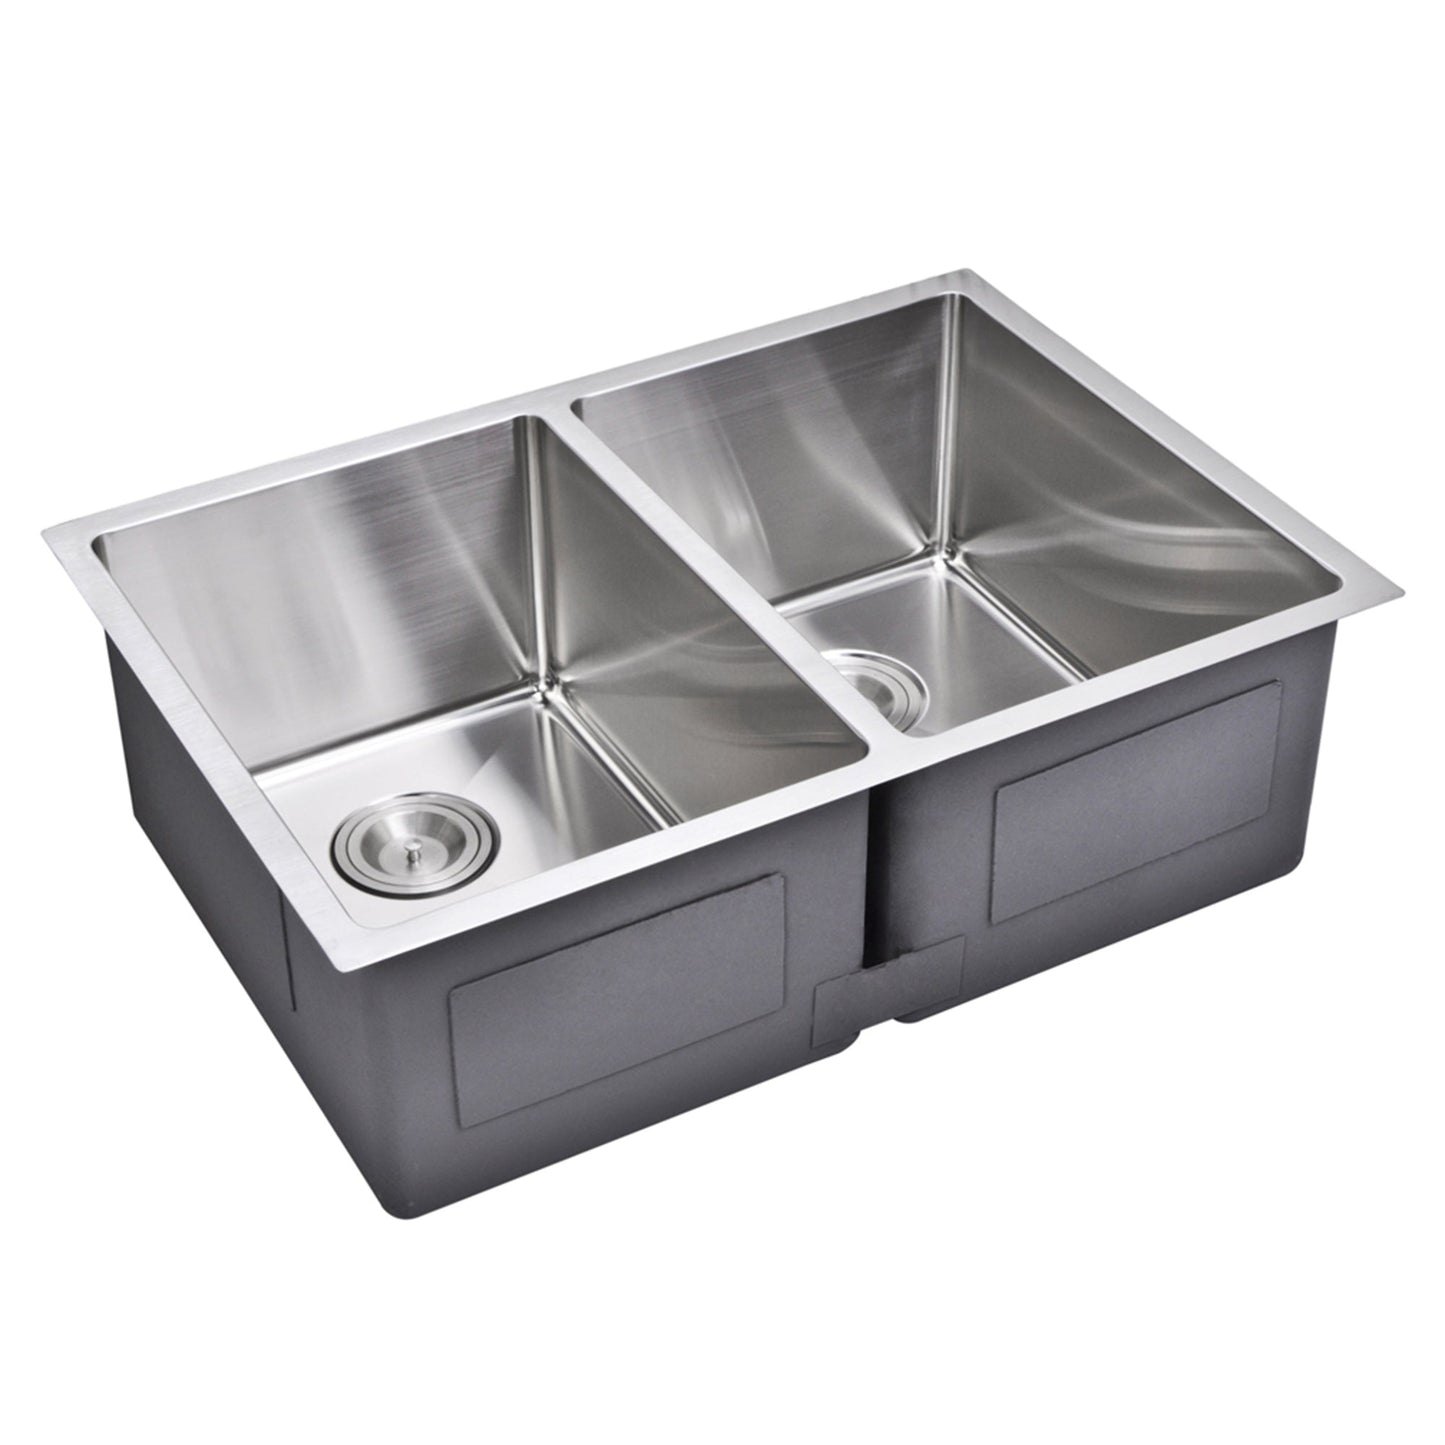 Water Creation Corner Radius 50/50 Double Bowl Stainless Steel Hand Made Undermount 29 Inch X 20 Inch Sink With Drains And Strainers